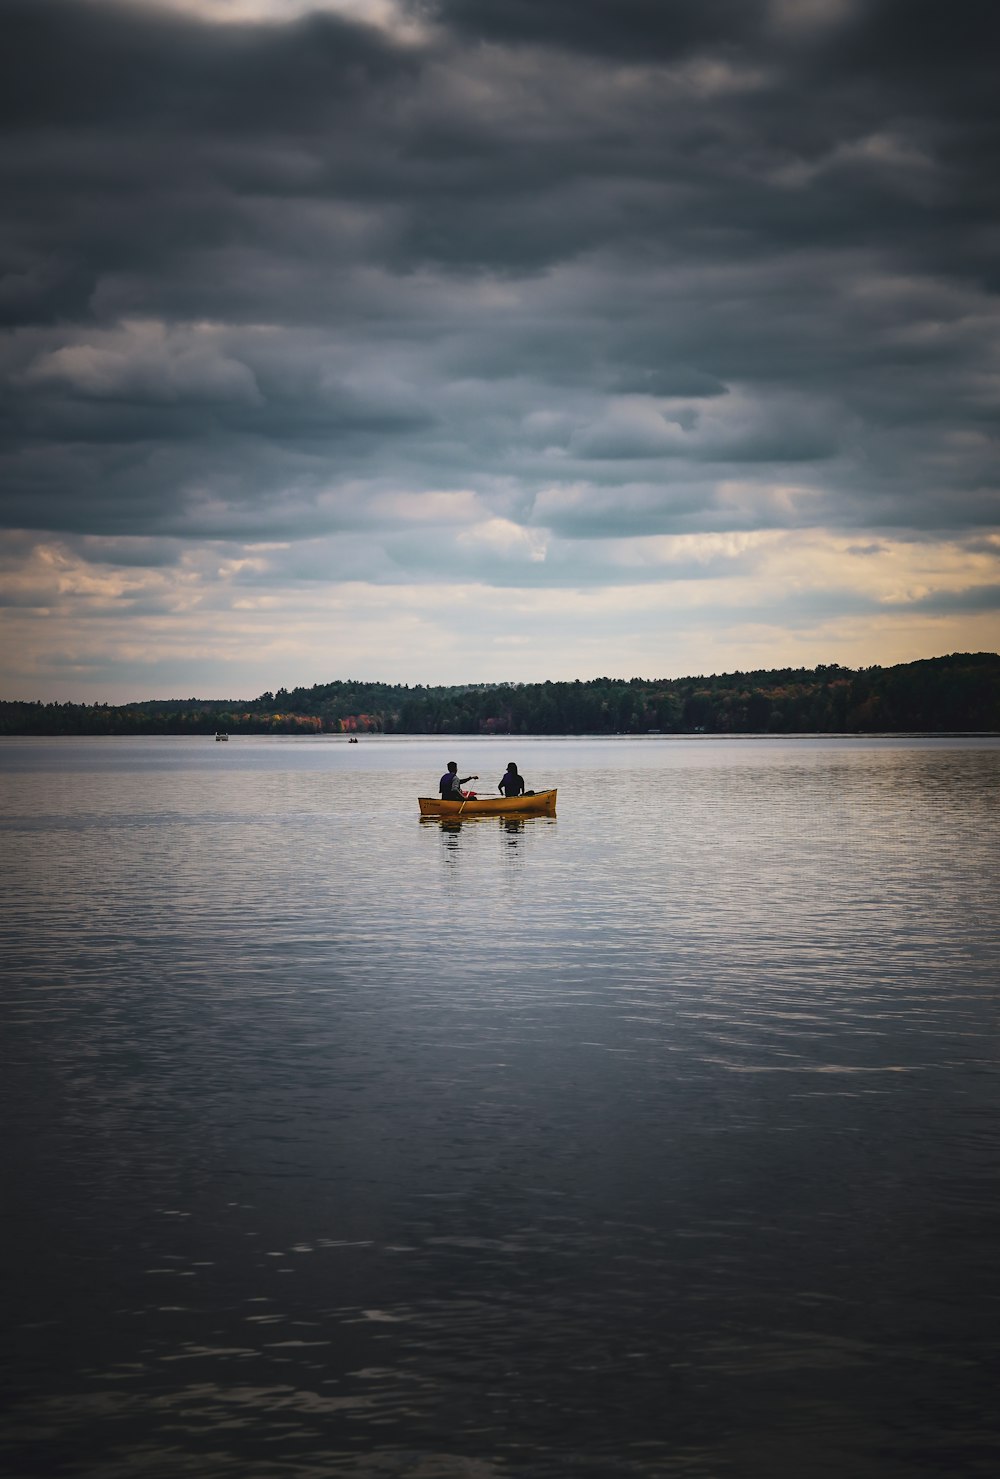 two people in a boat on a large body of water